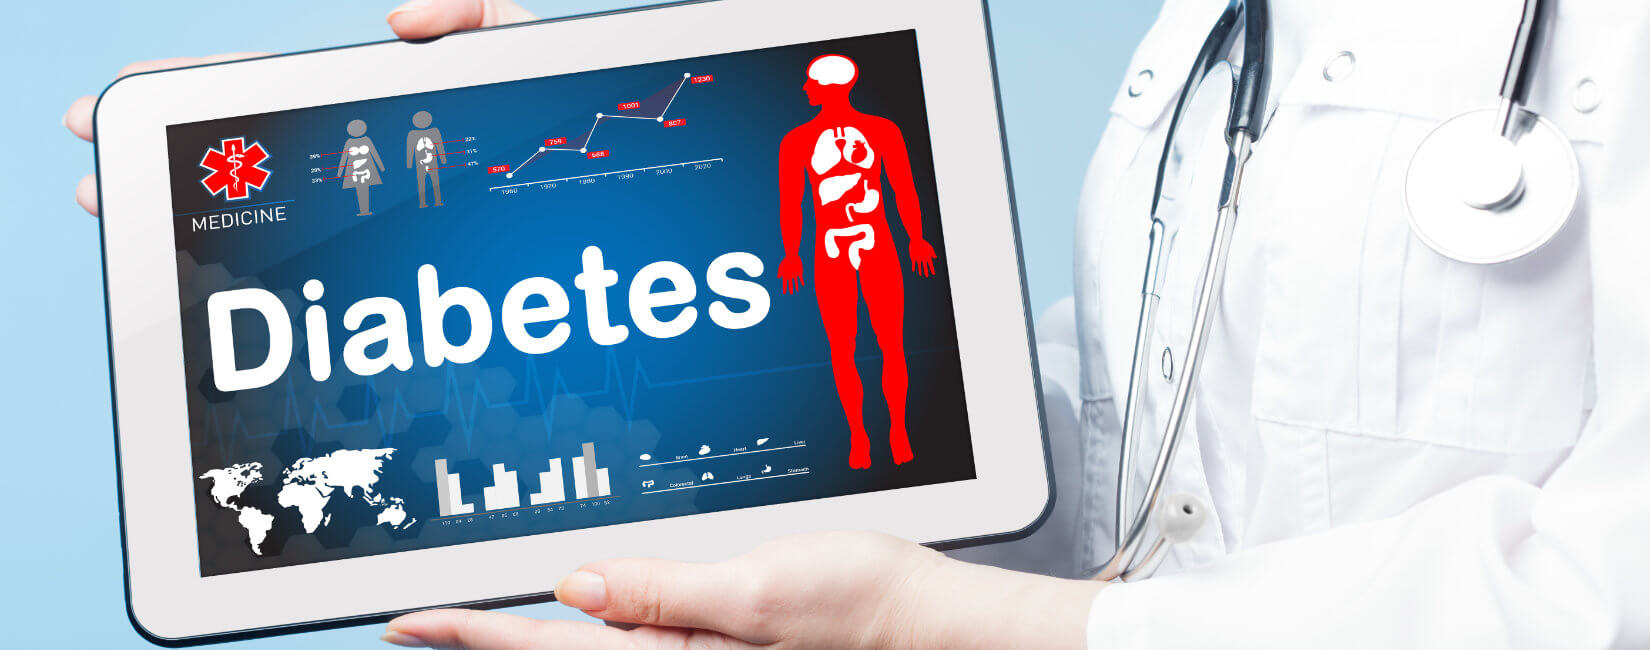 Diabetes awareness online training course, CPD certified e-learning course